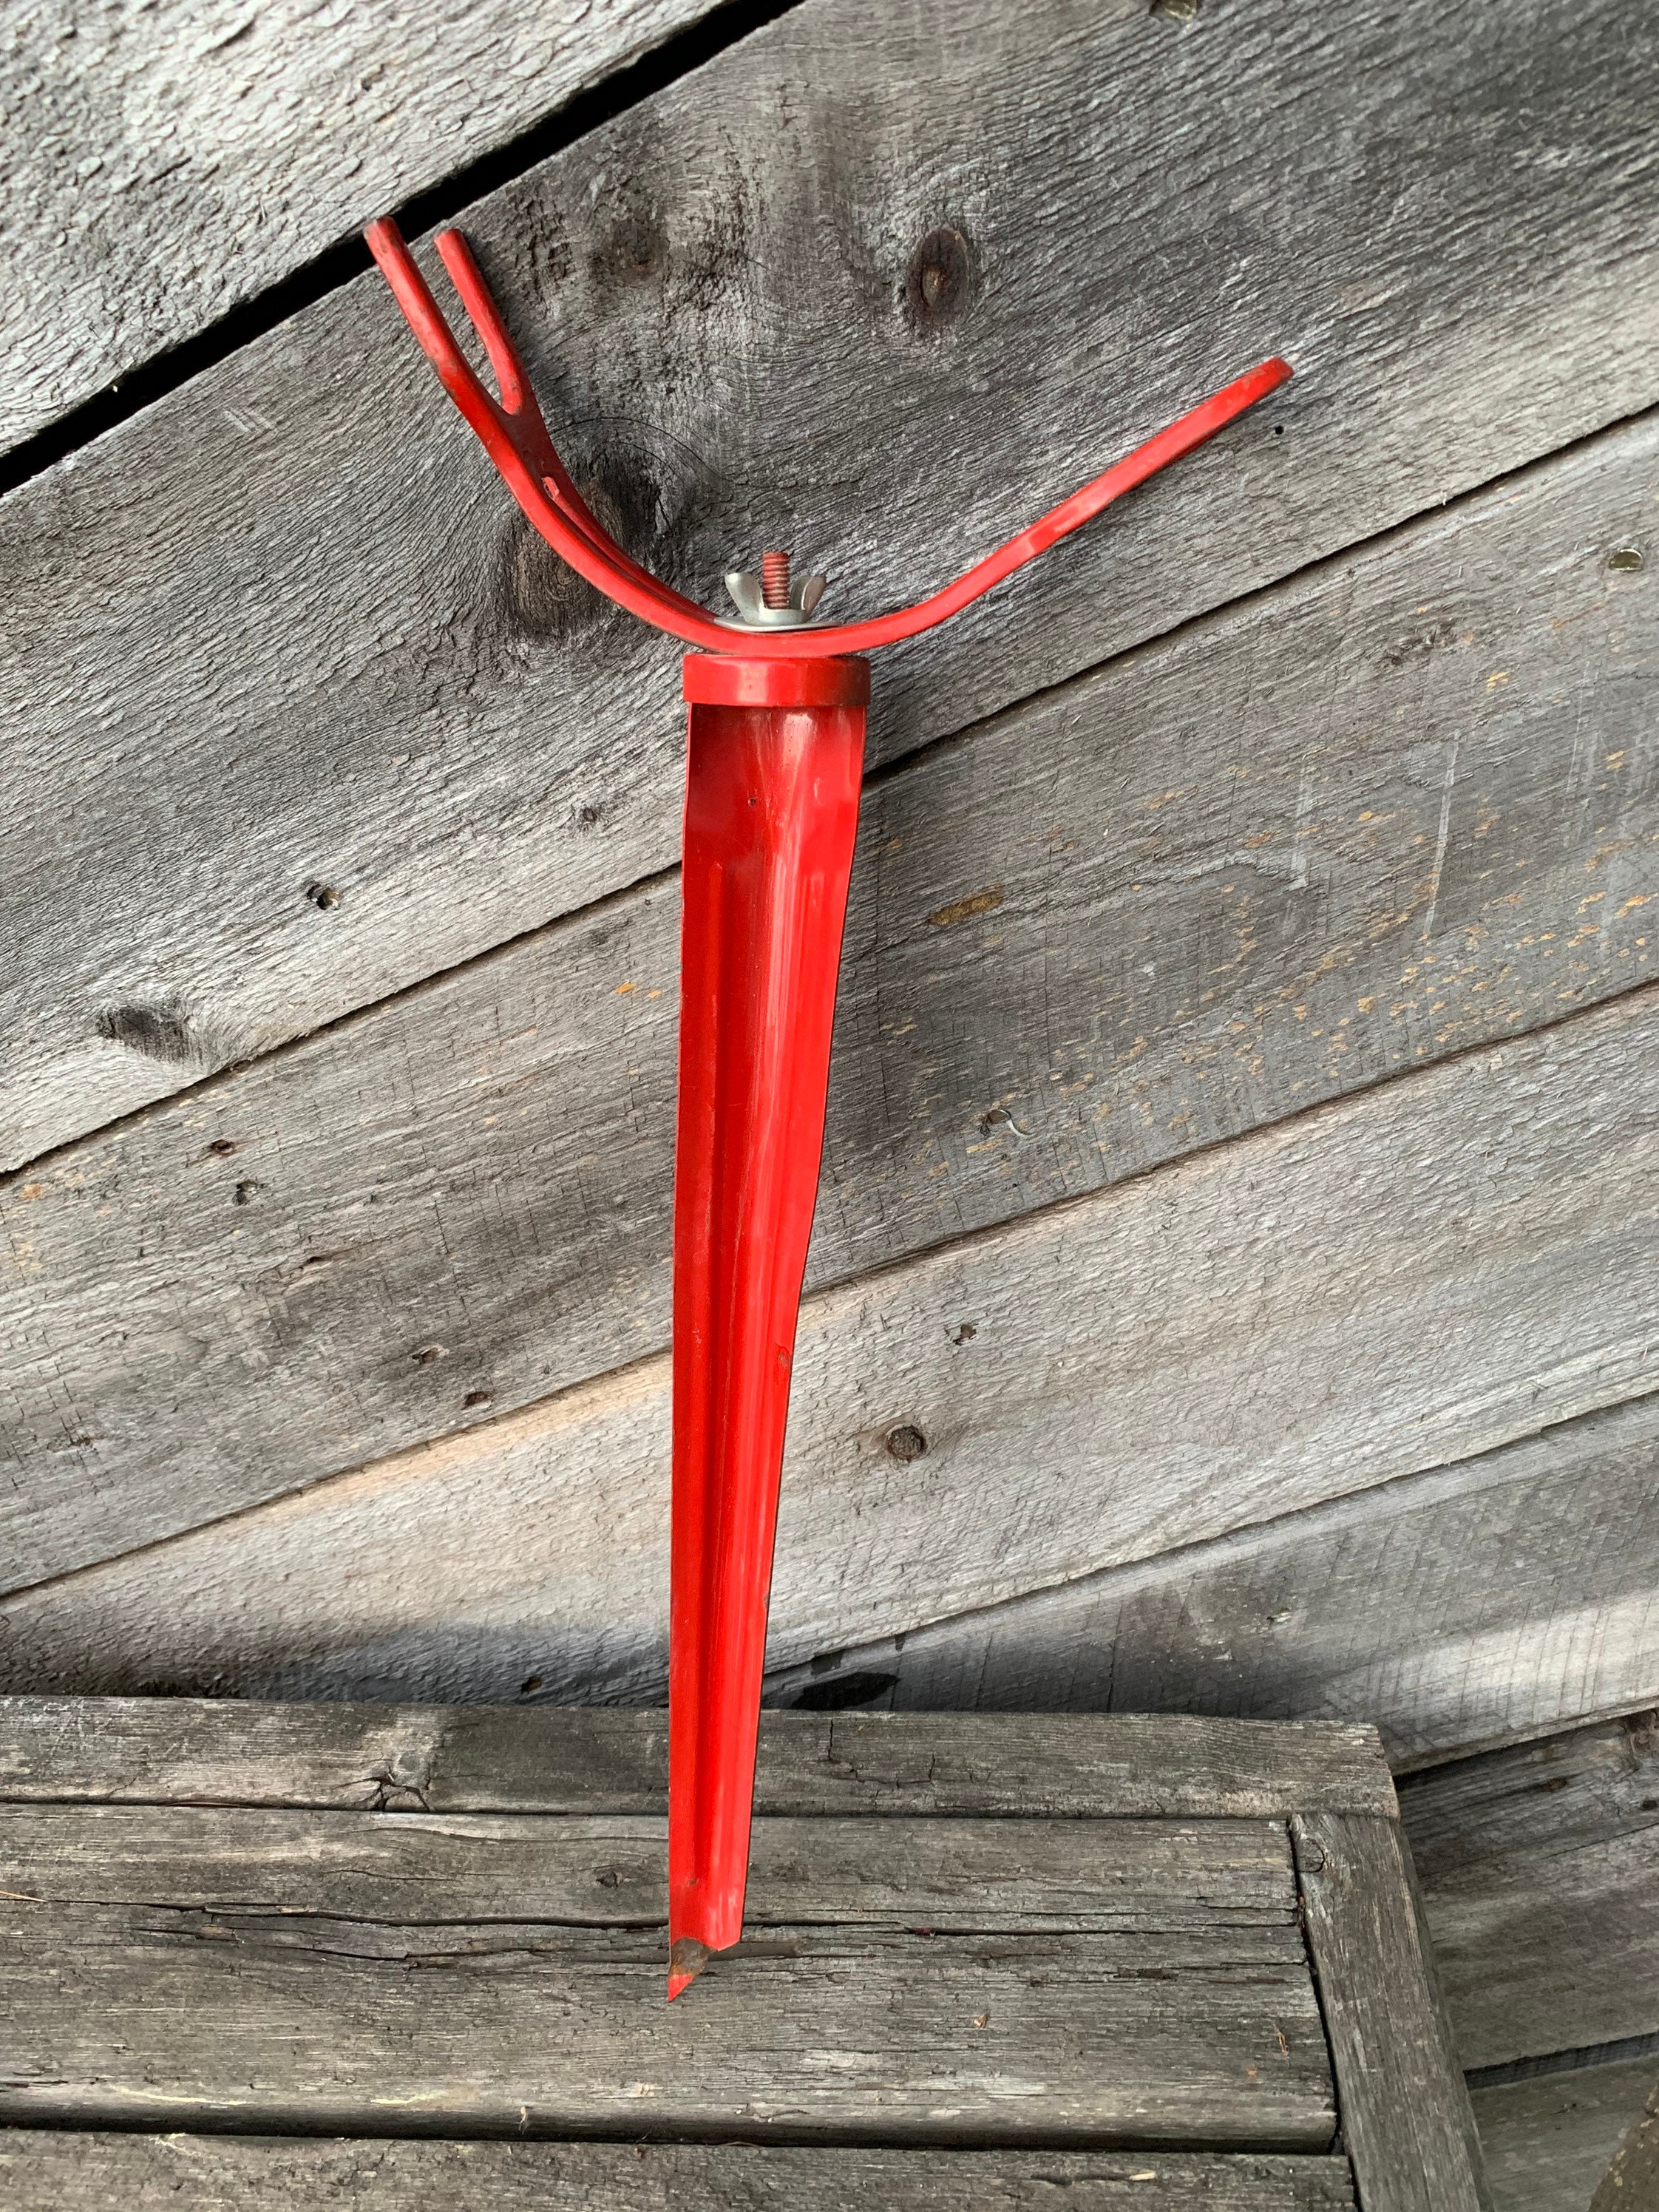 Fishing Pole Holder Rod Stand Shore Fishing Red Metal Vintage Reel